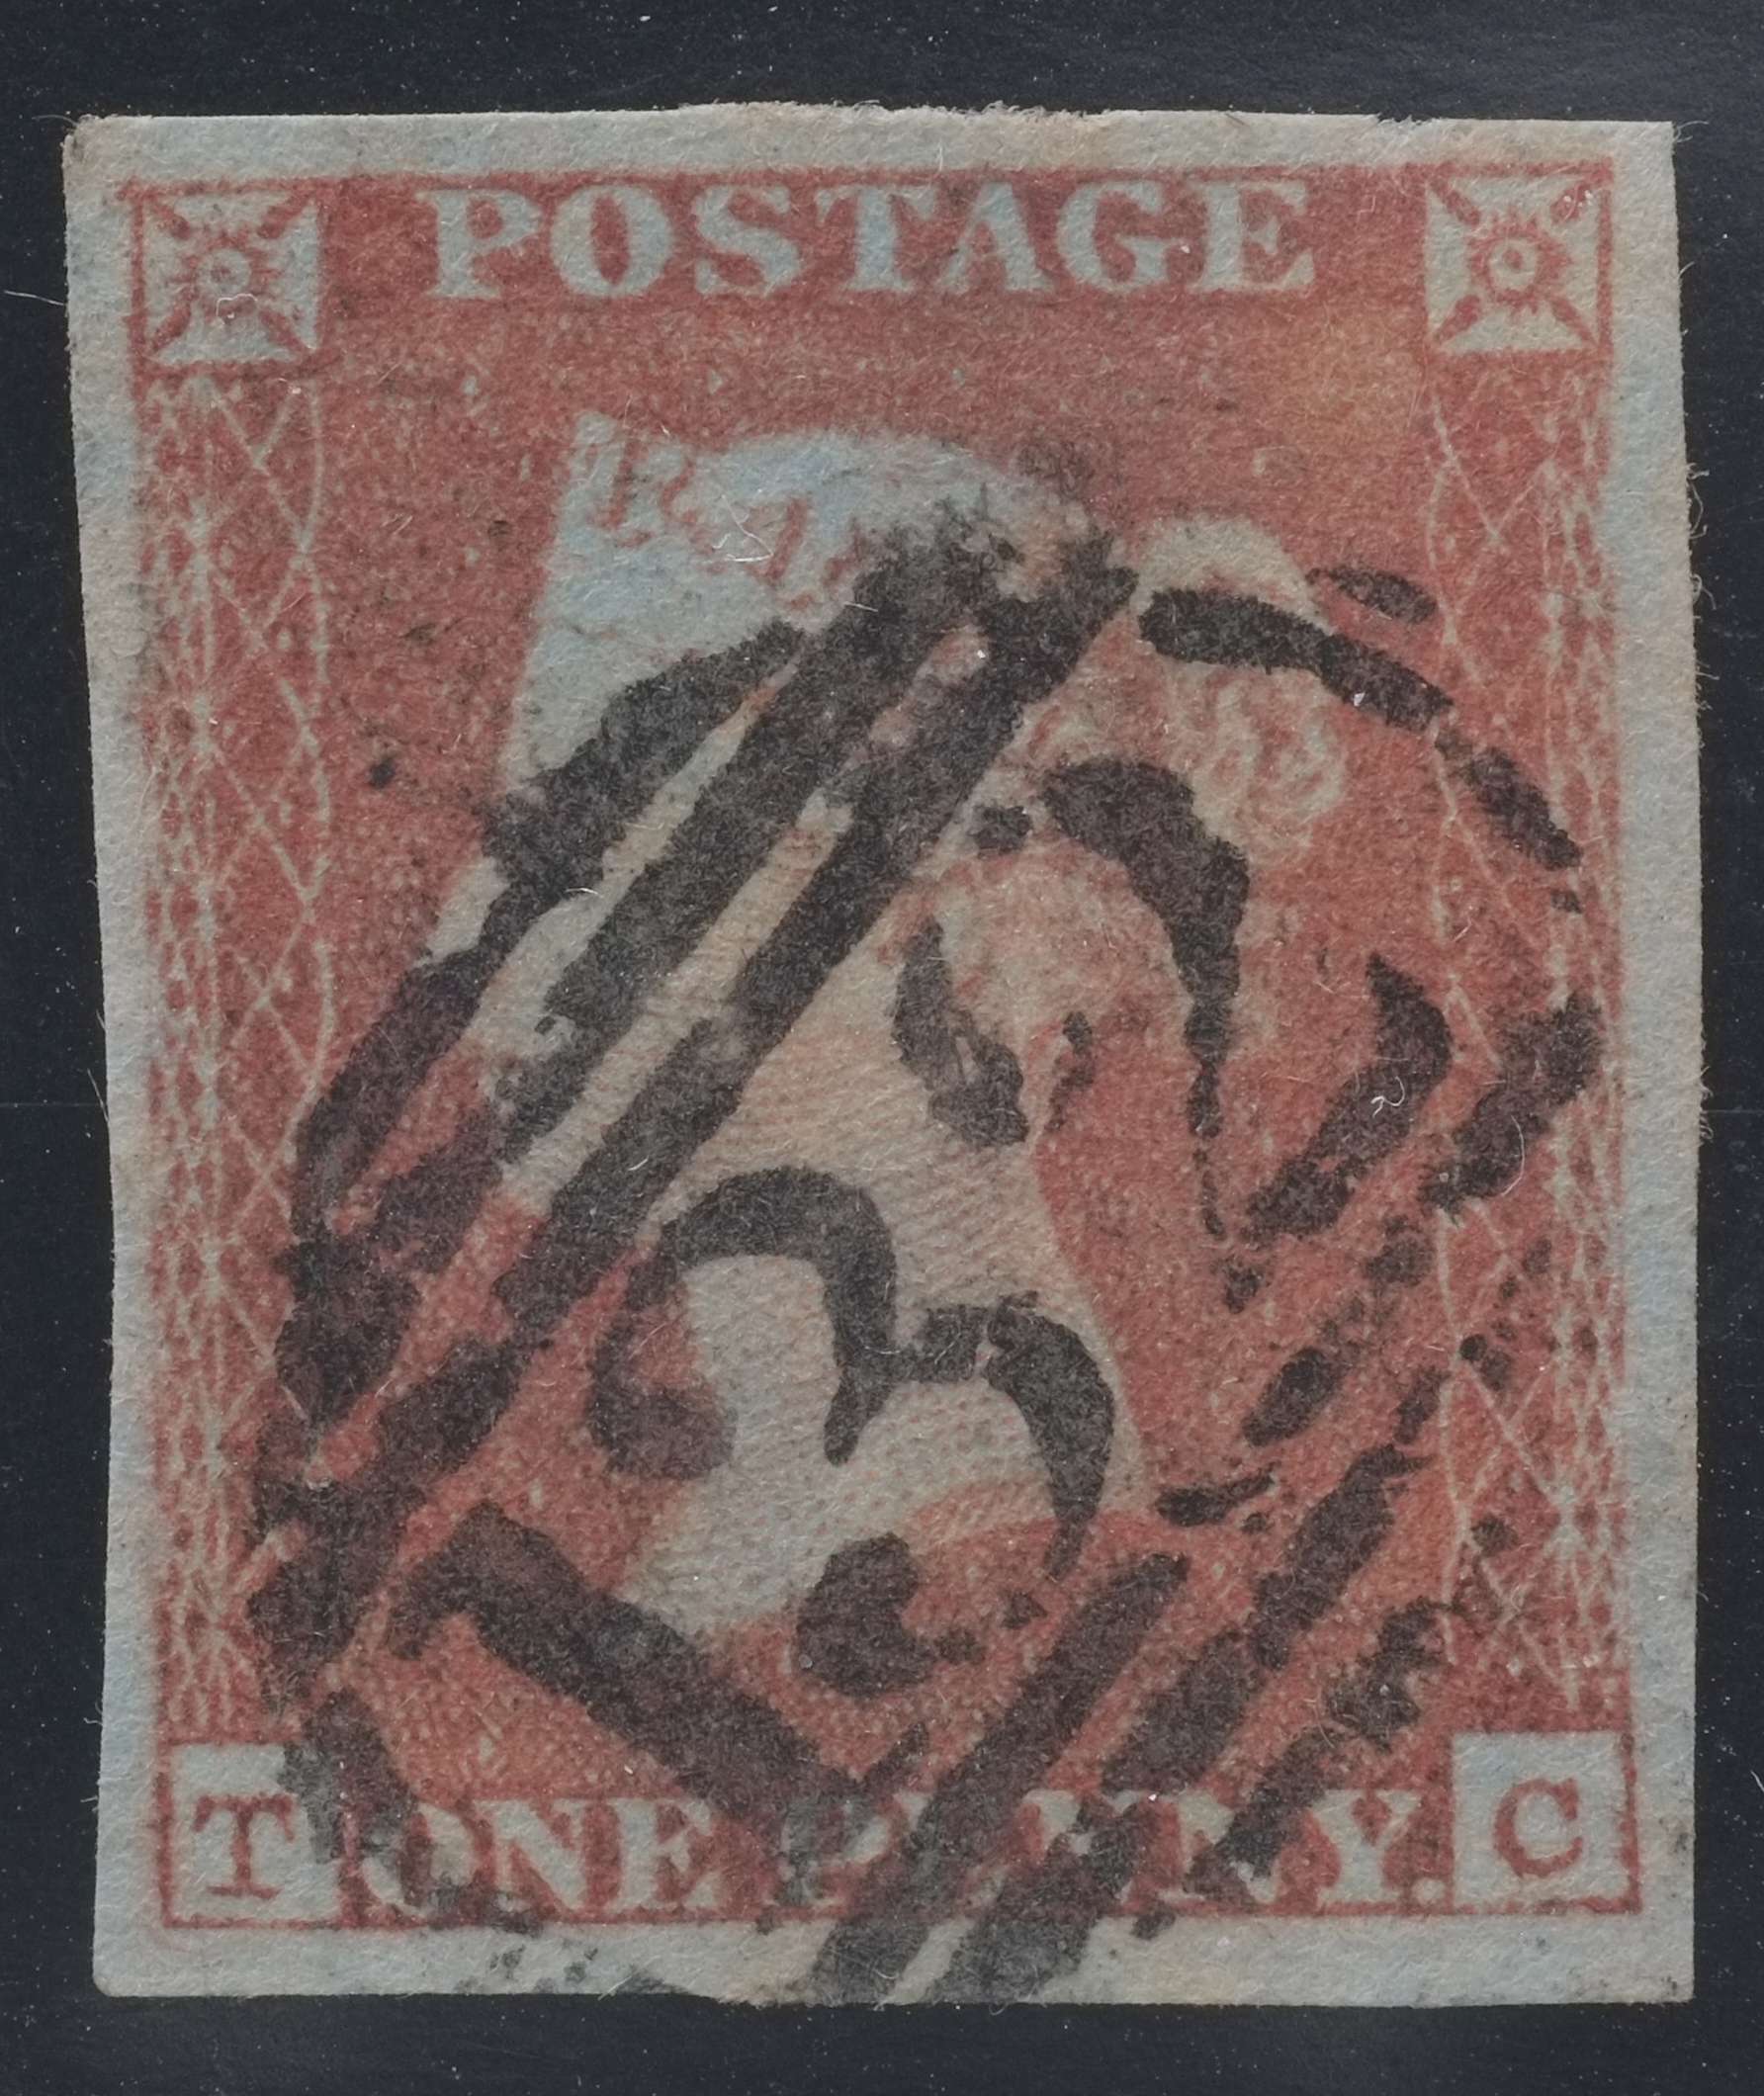 1d Red-Brown 4 Margin with the 132 BRIGHTON CANCEL